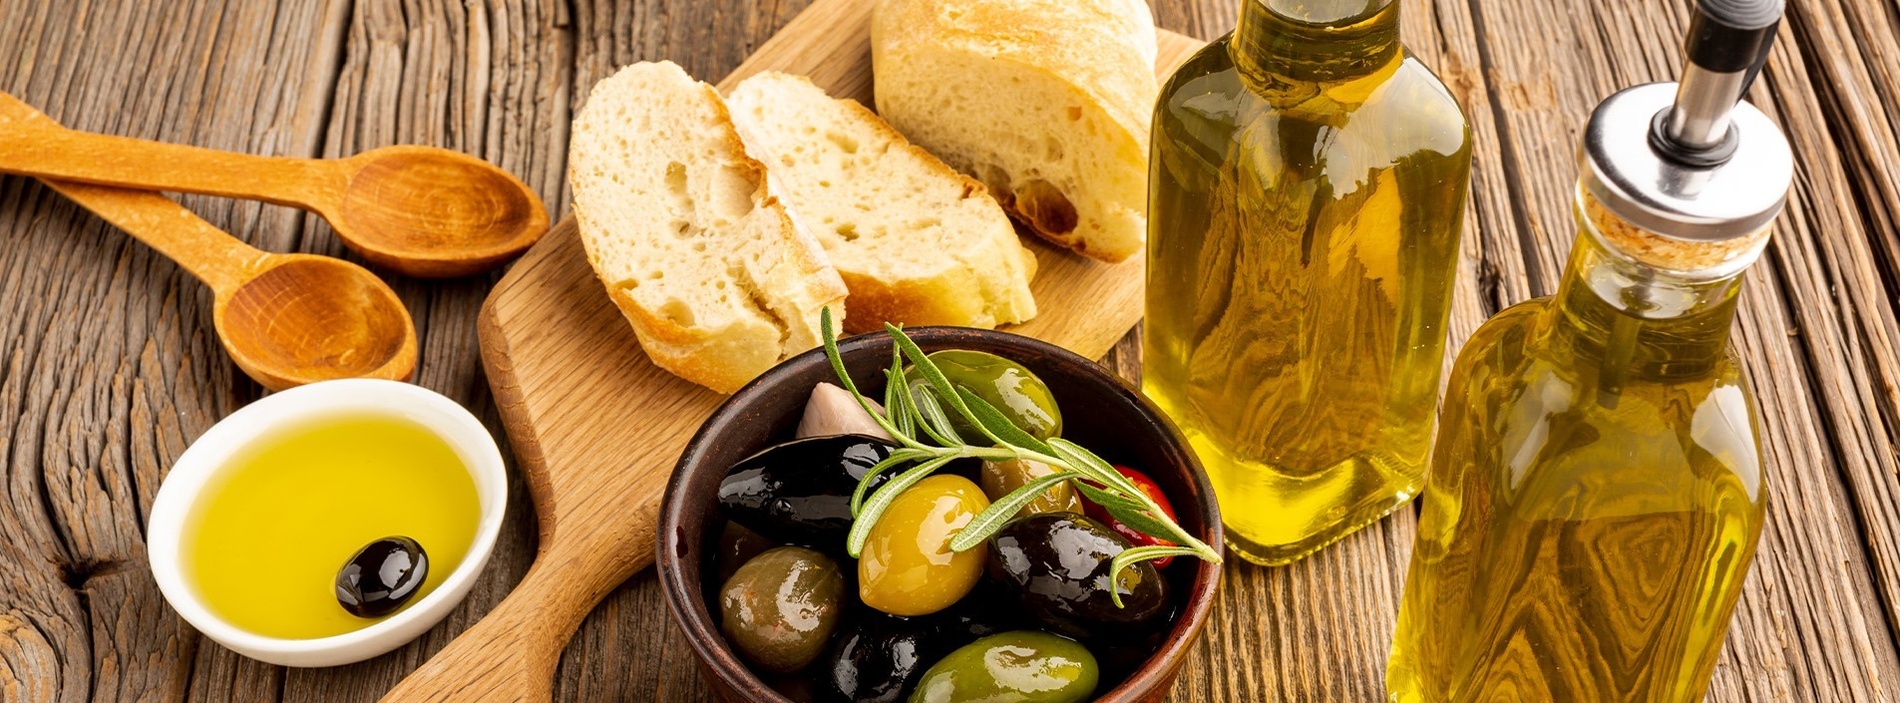 two bottles of olive oil and a bowl of olives on a wooden table